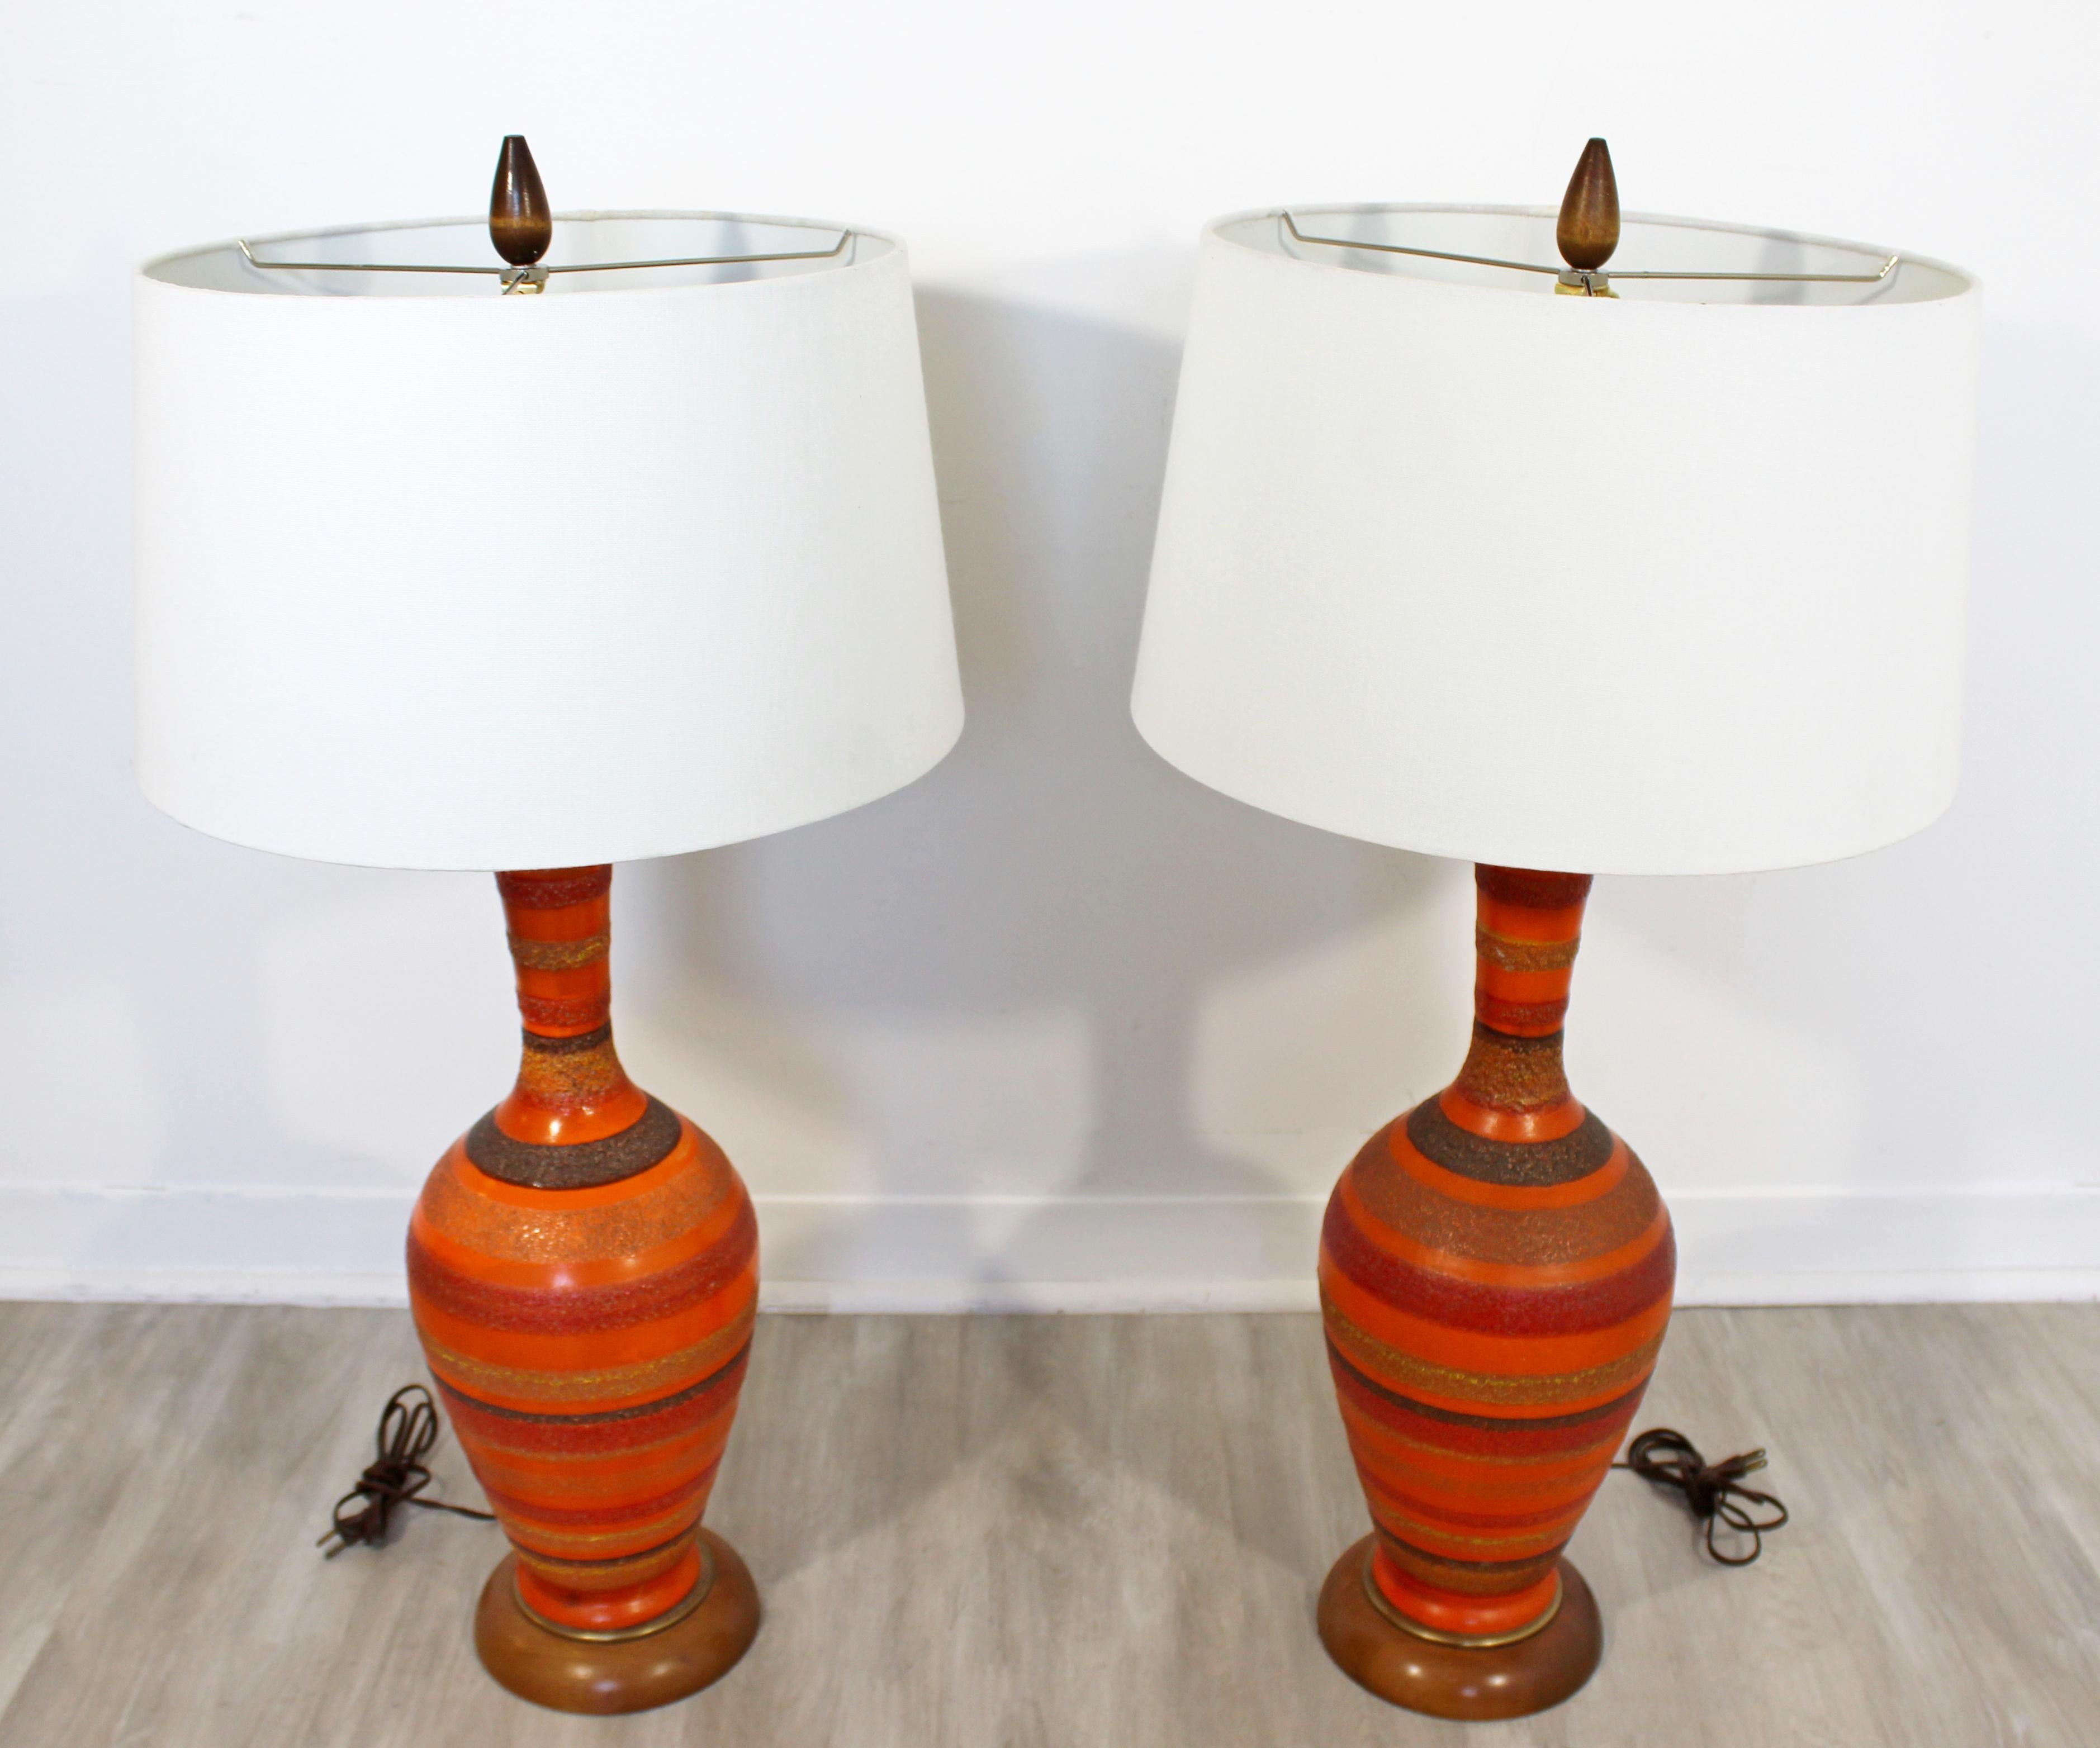 For your consideration is a stunningly vibrant pair of striped, ceramic table lamps, with wood finials, by Aldo Londi for Bitossi, made in Italy, circa 1960s. In excellent vintage condition. The dimensions of the lamps are 7